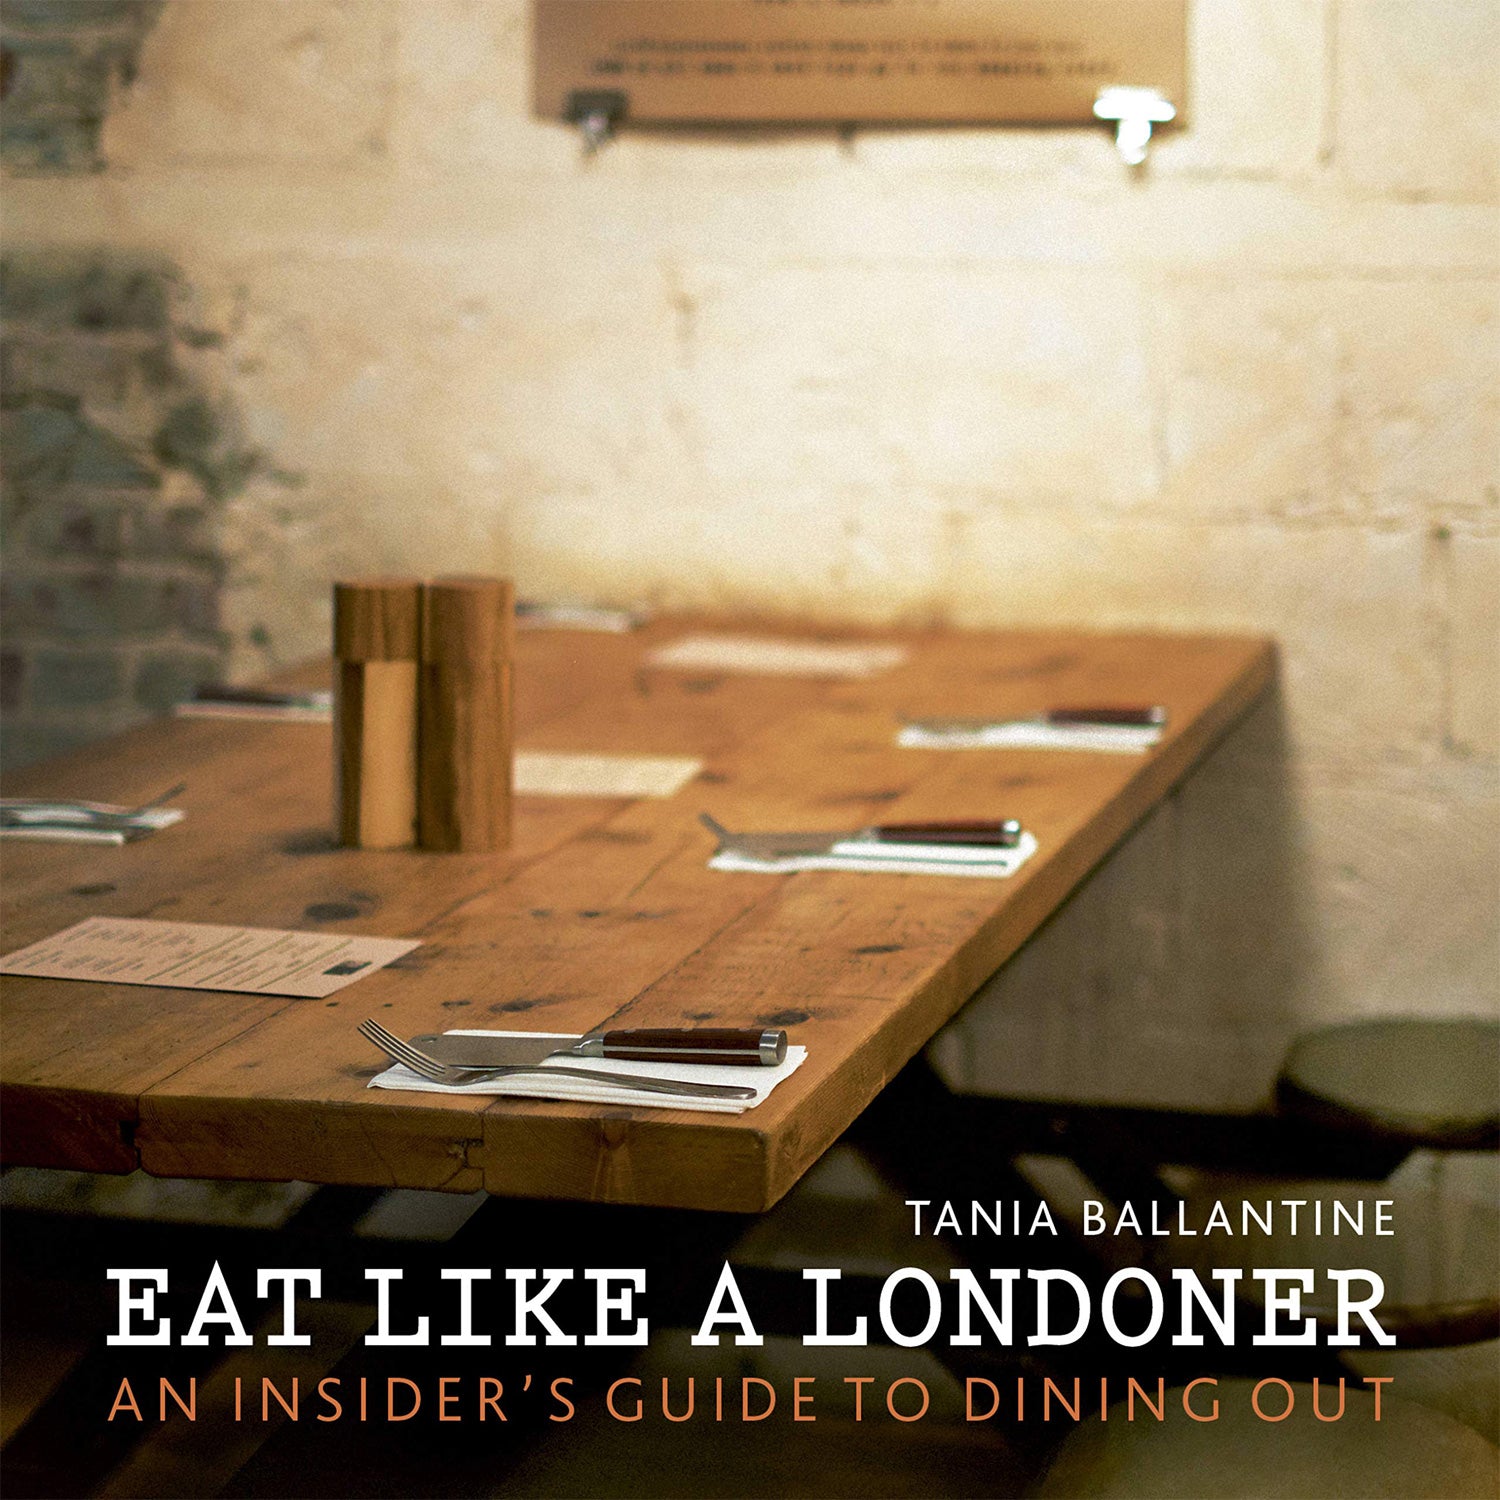 Eat Like A Londoner: An Insider's Guide To Dining Out Book by Tania Ballantine 1